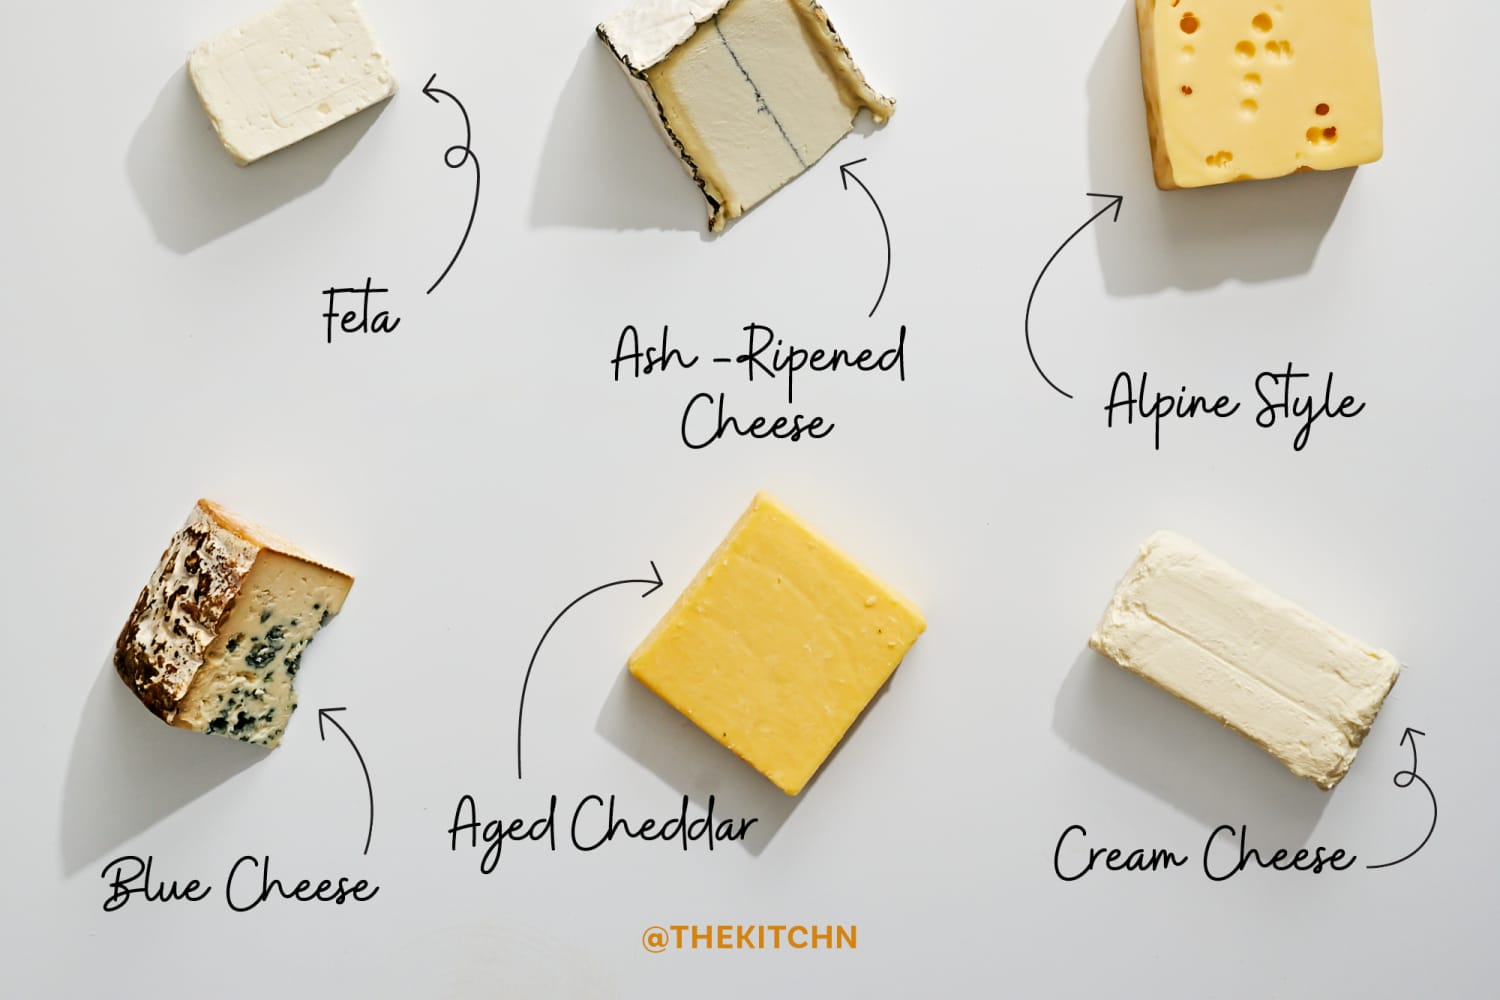 9 Essential Types of Cheese